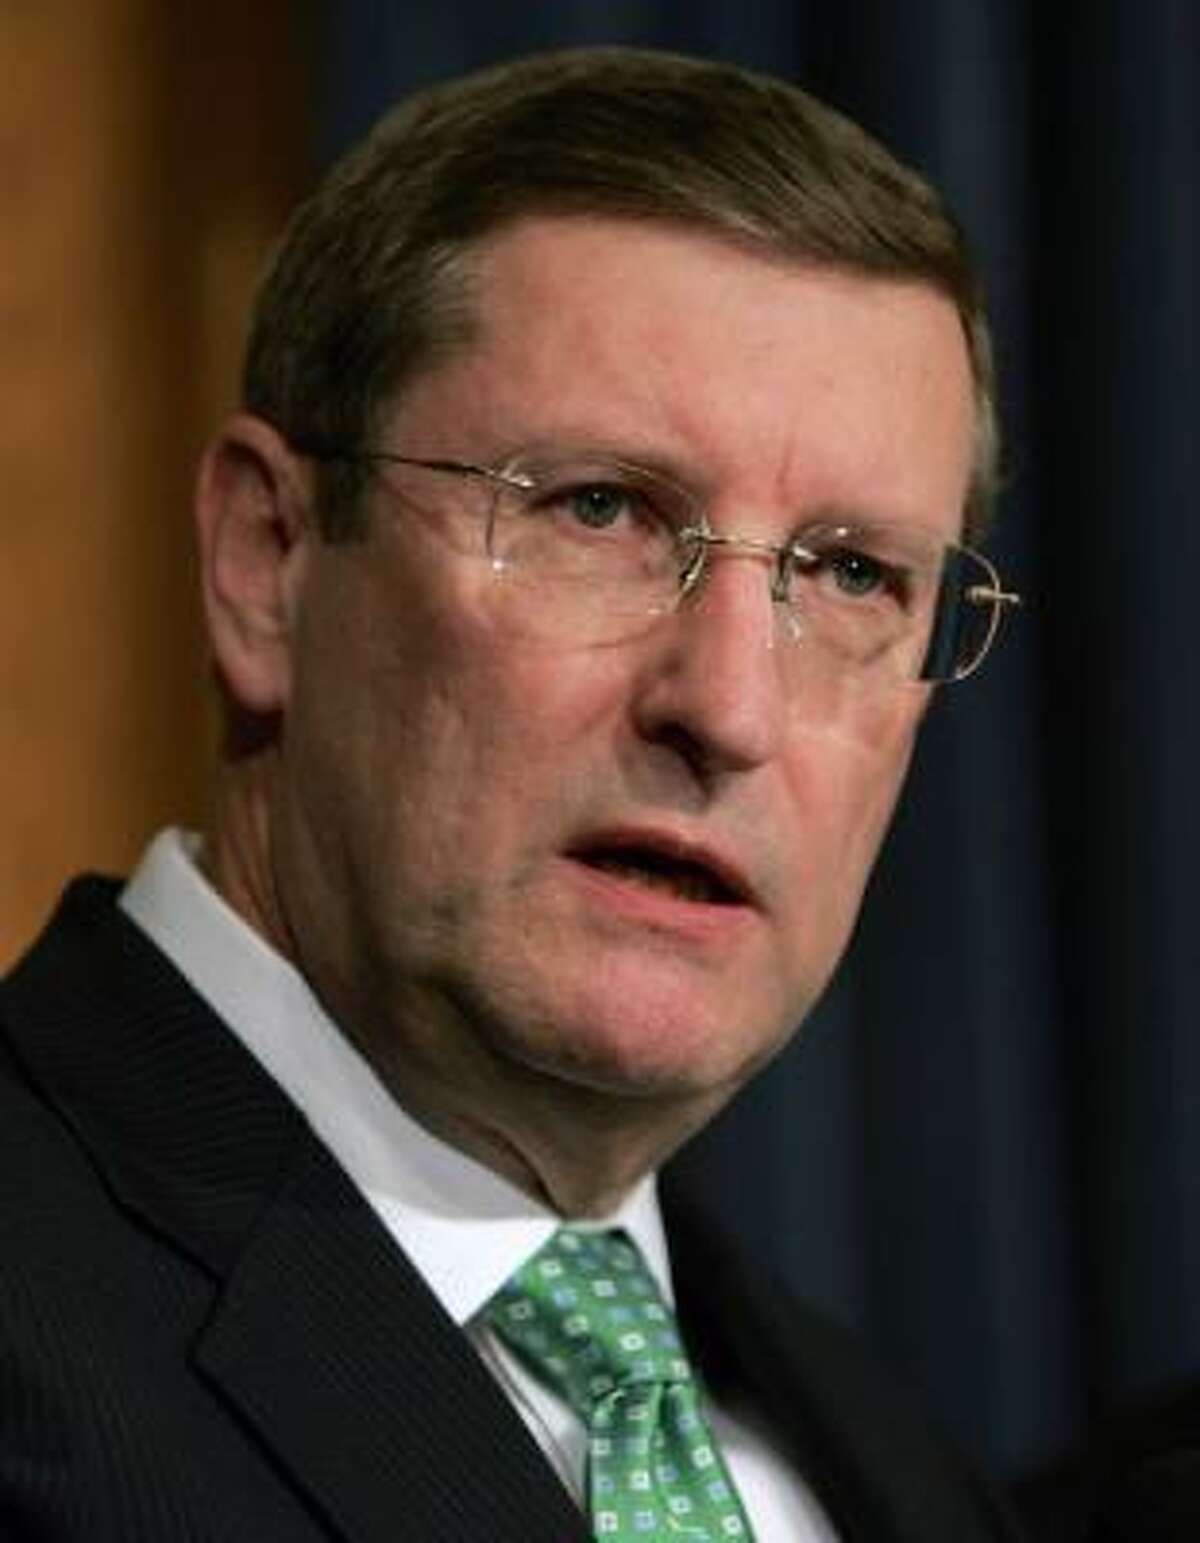 Kent Conrad, chairman of the U.S. Senate Budget Committee, speaks about the fiscal year 2009 budget at a news conference in Washington, D.C.